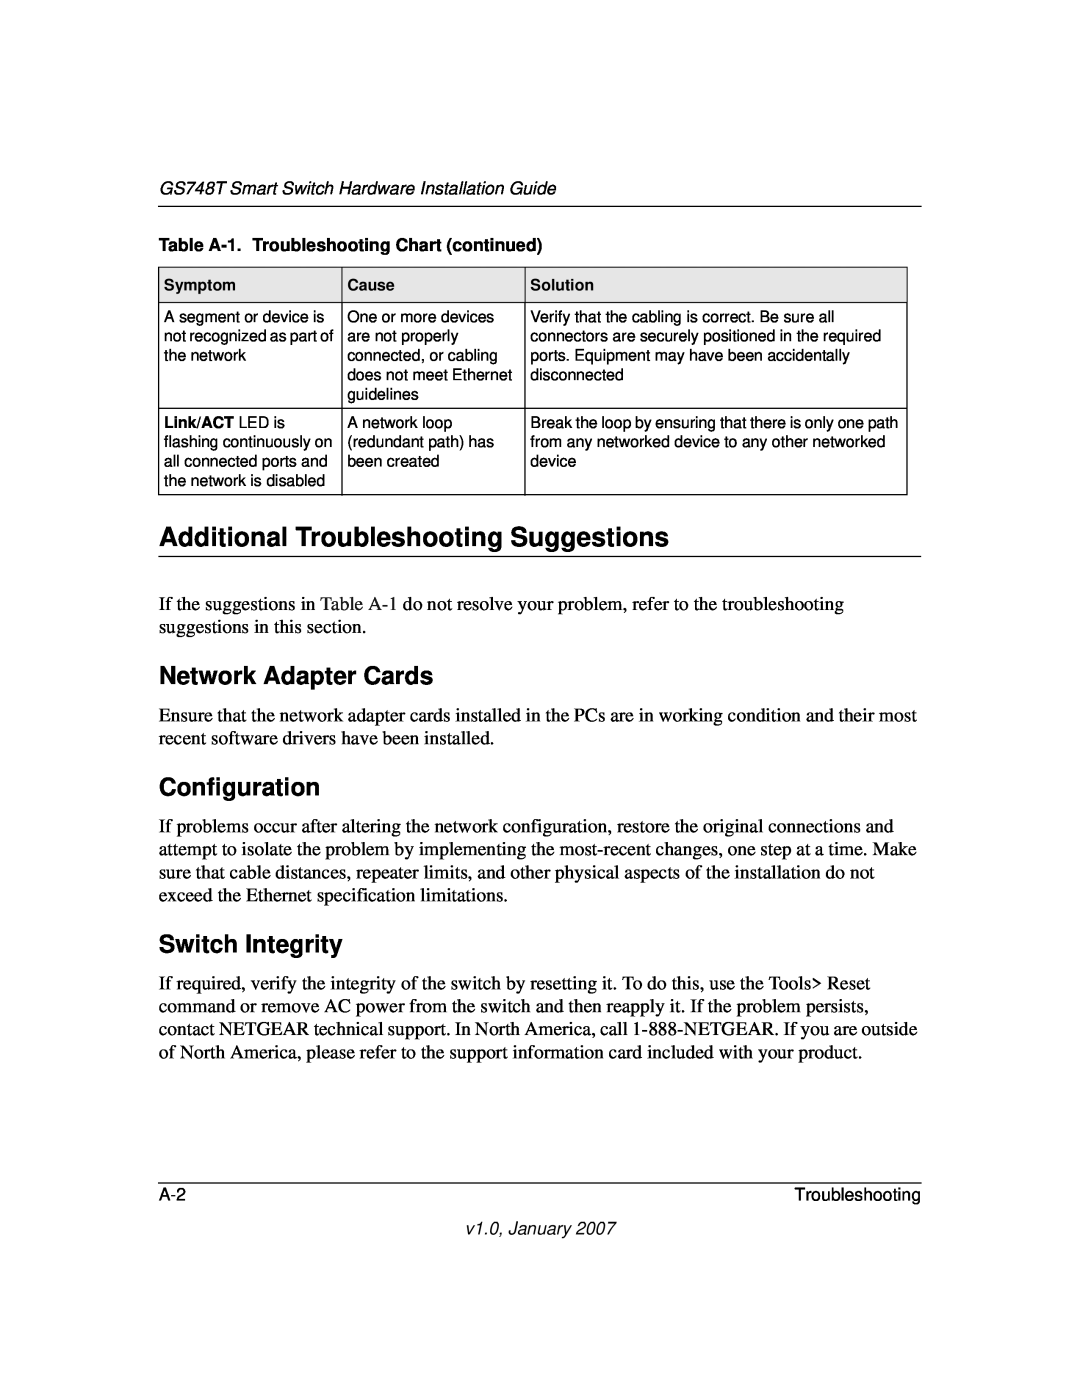 NETGEAR GS748T manual Additional Troubleshooting Suggestions, Network Adapter Cards, Configuration, Switch Integrity 